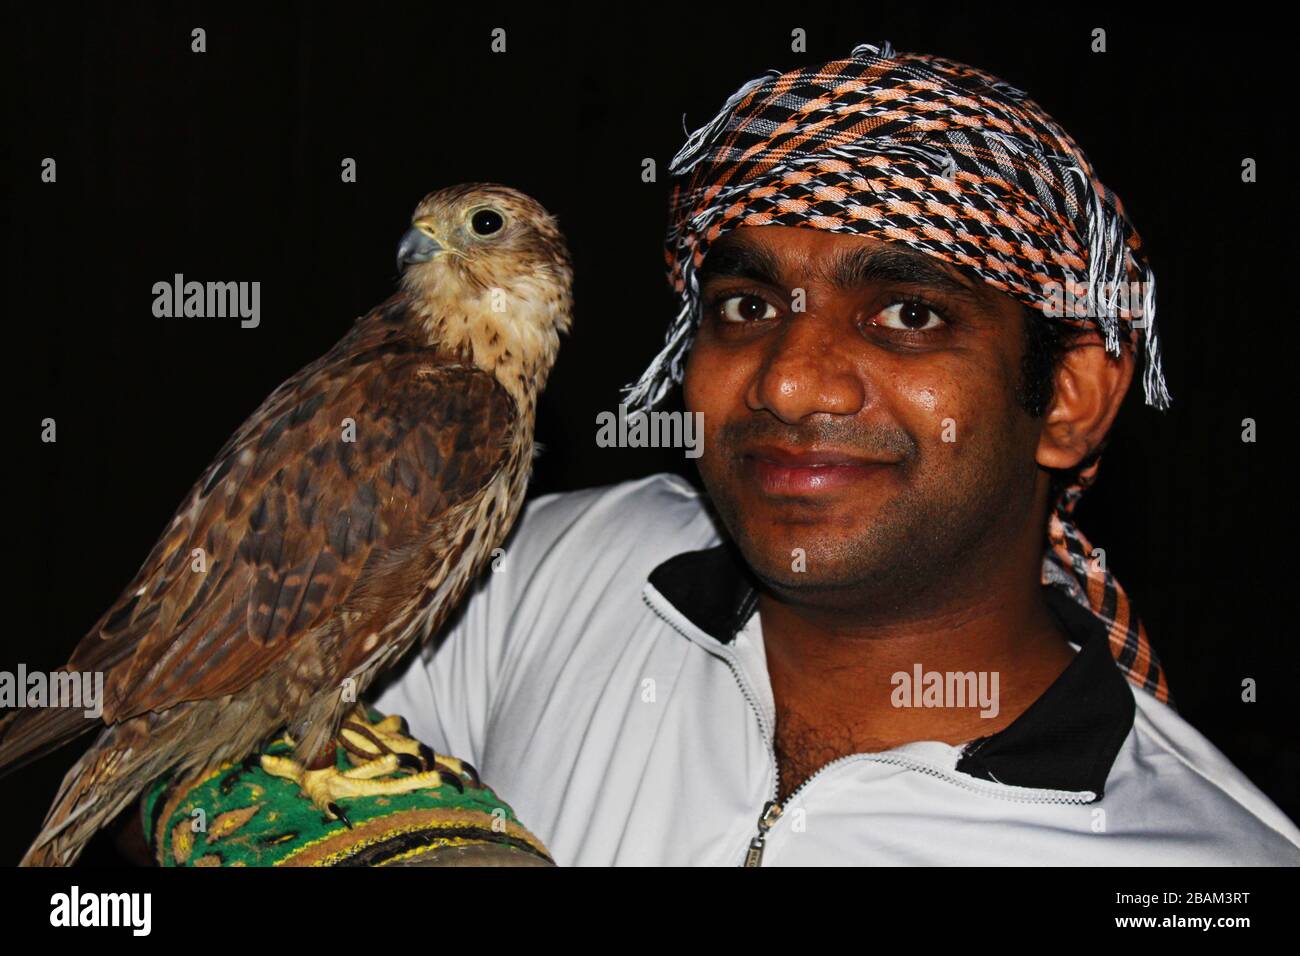 young gentile man with falcon bird at night in Arabia Stock Photo